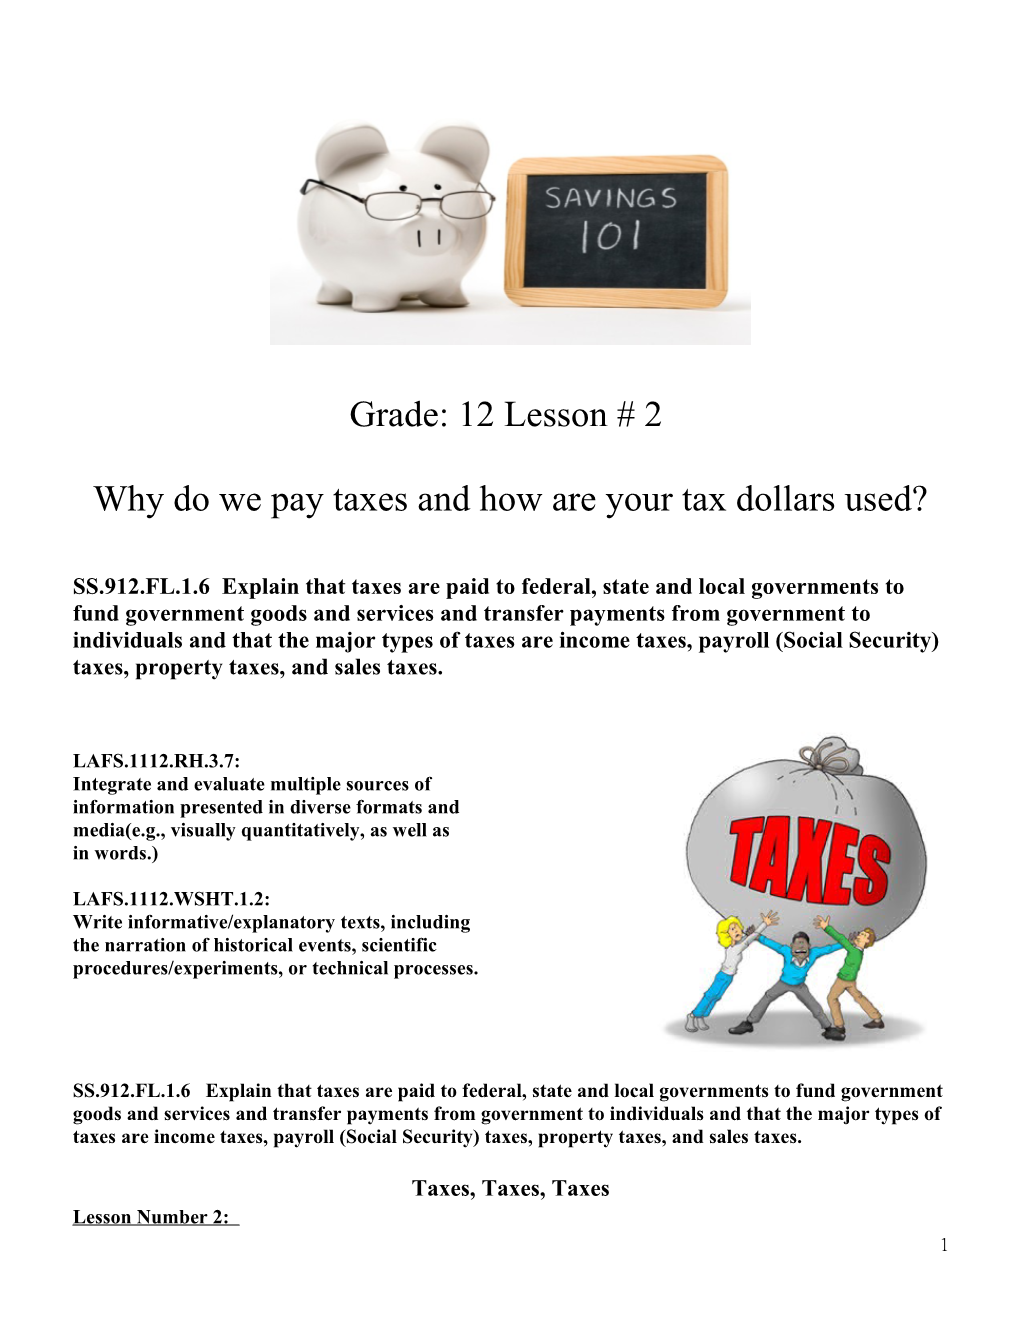 Why Do We Pay Taxes and How Are Your Tax Dollars Used?